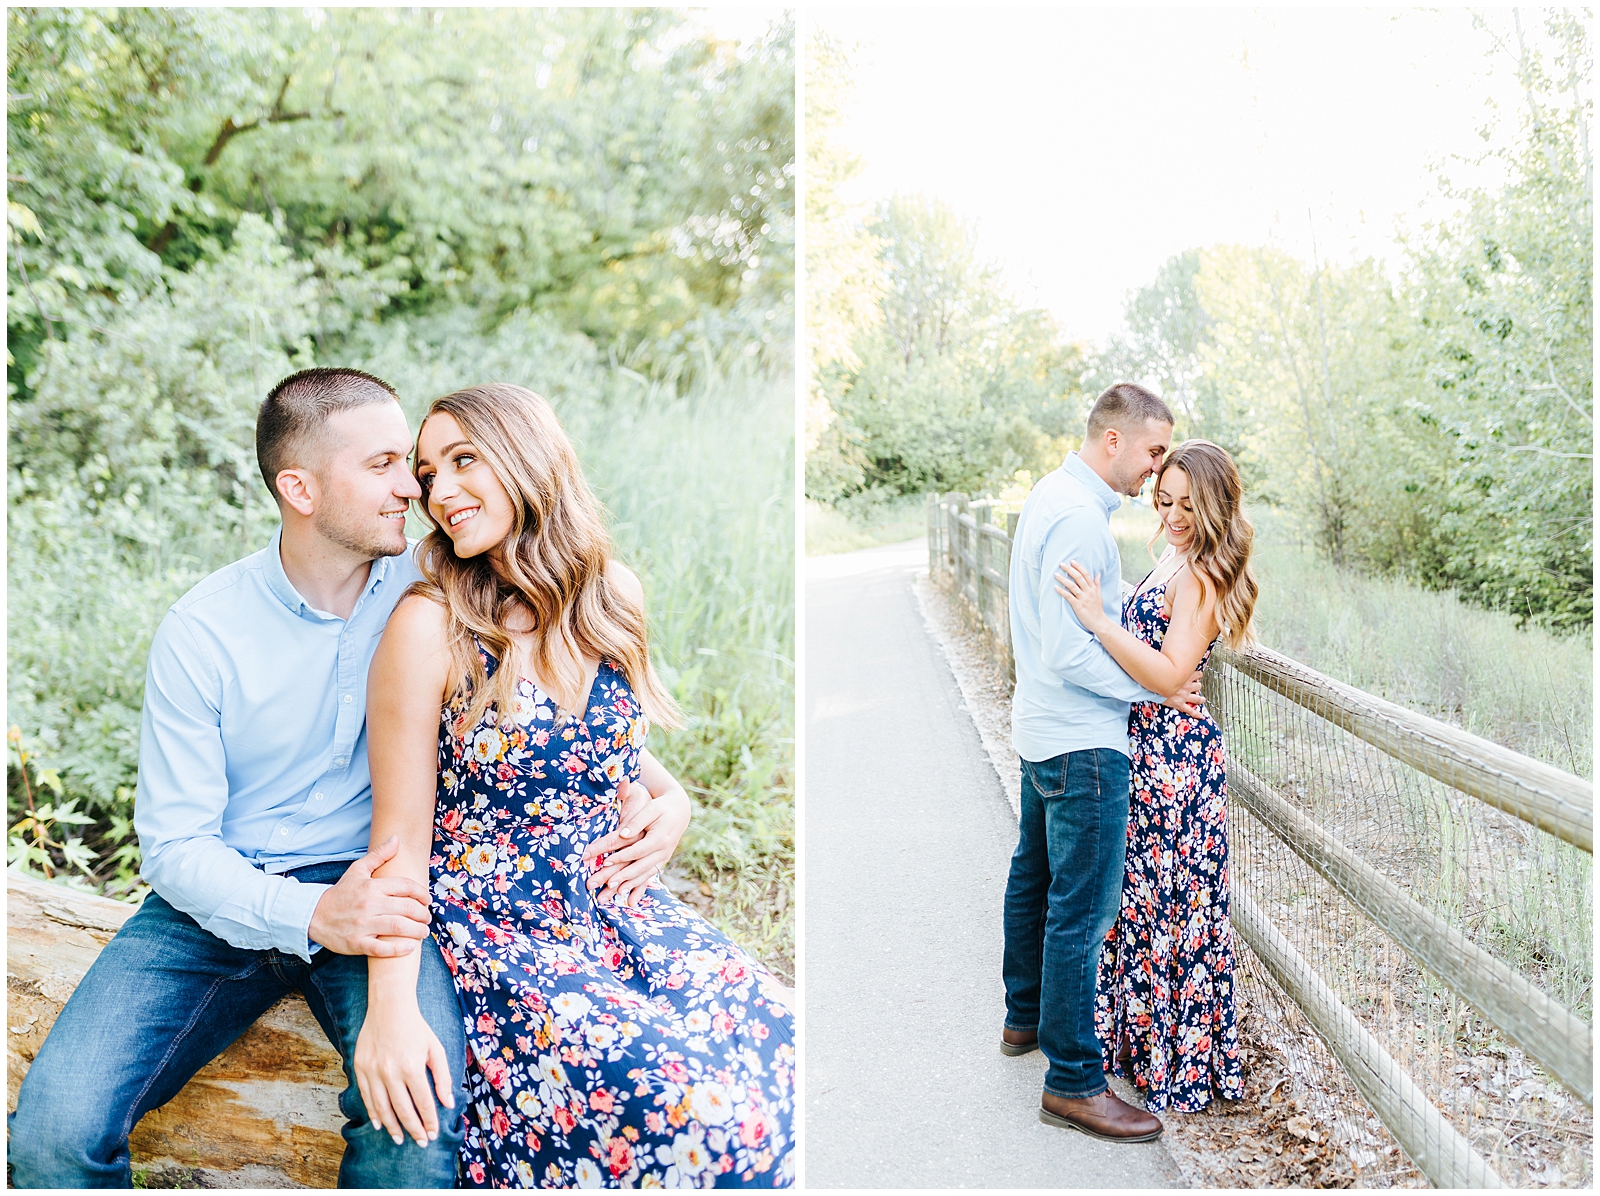 Dreamy Boise River Engagement in the Spring